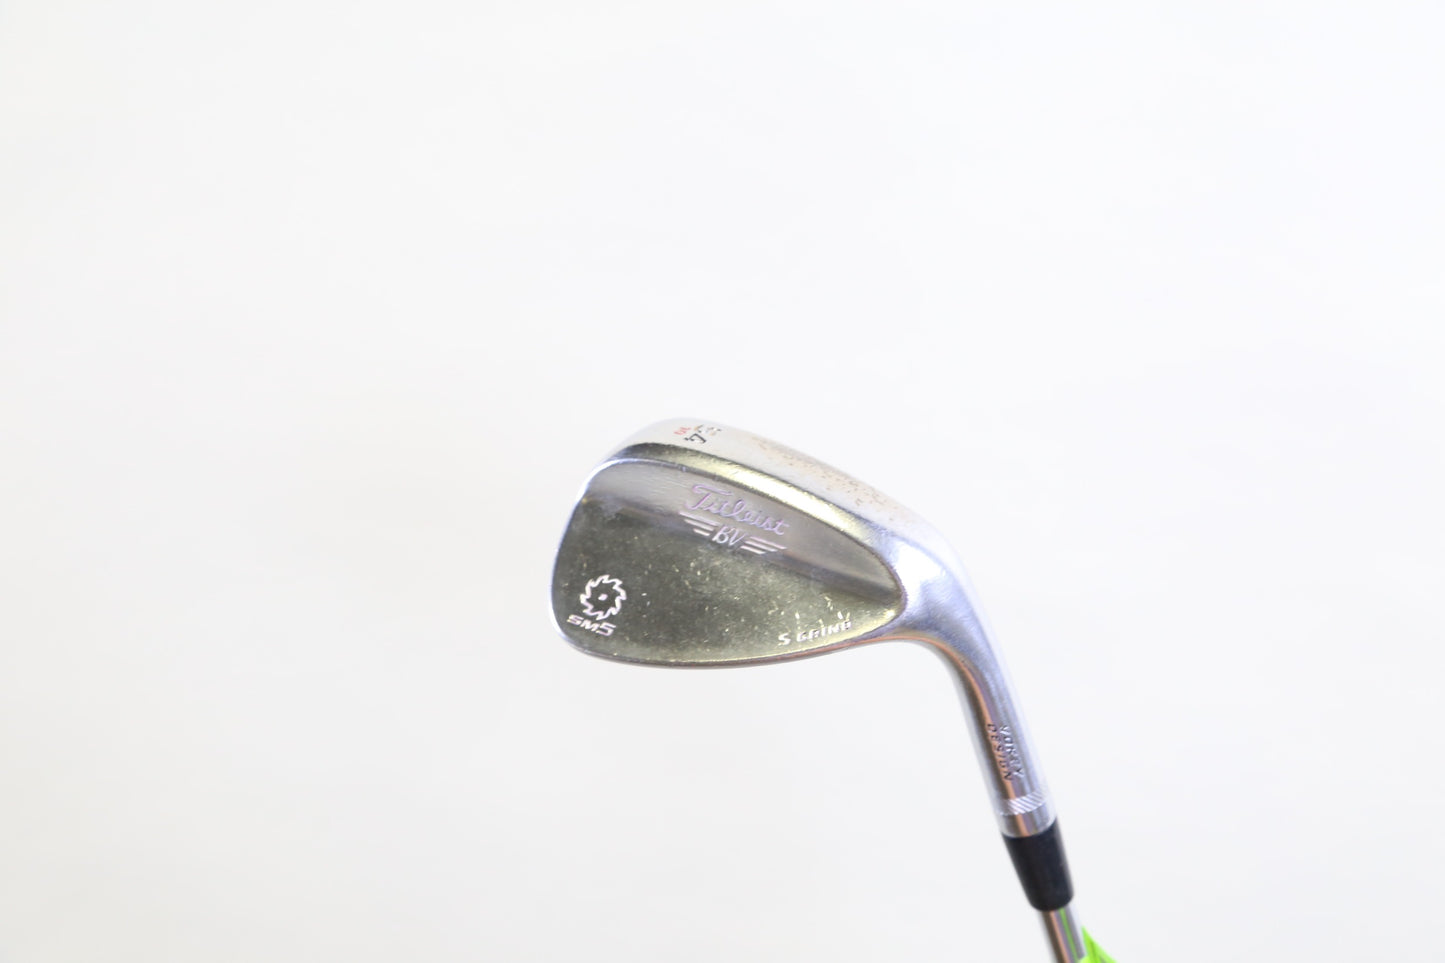 Used Titleist Vokey SM5 Tour Chrome S Grind Sand Wedge - Right-Handed - 54 Degrees - Stiff Flex